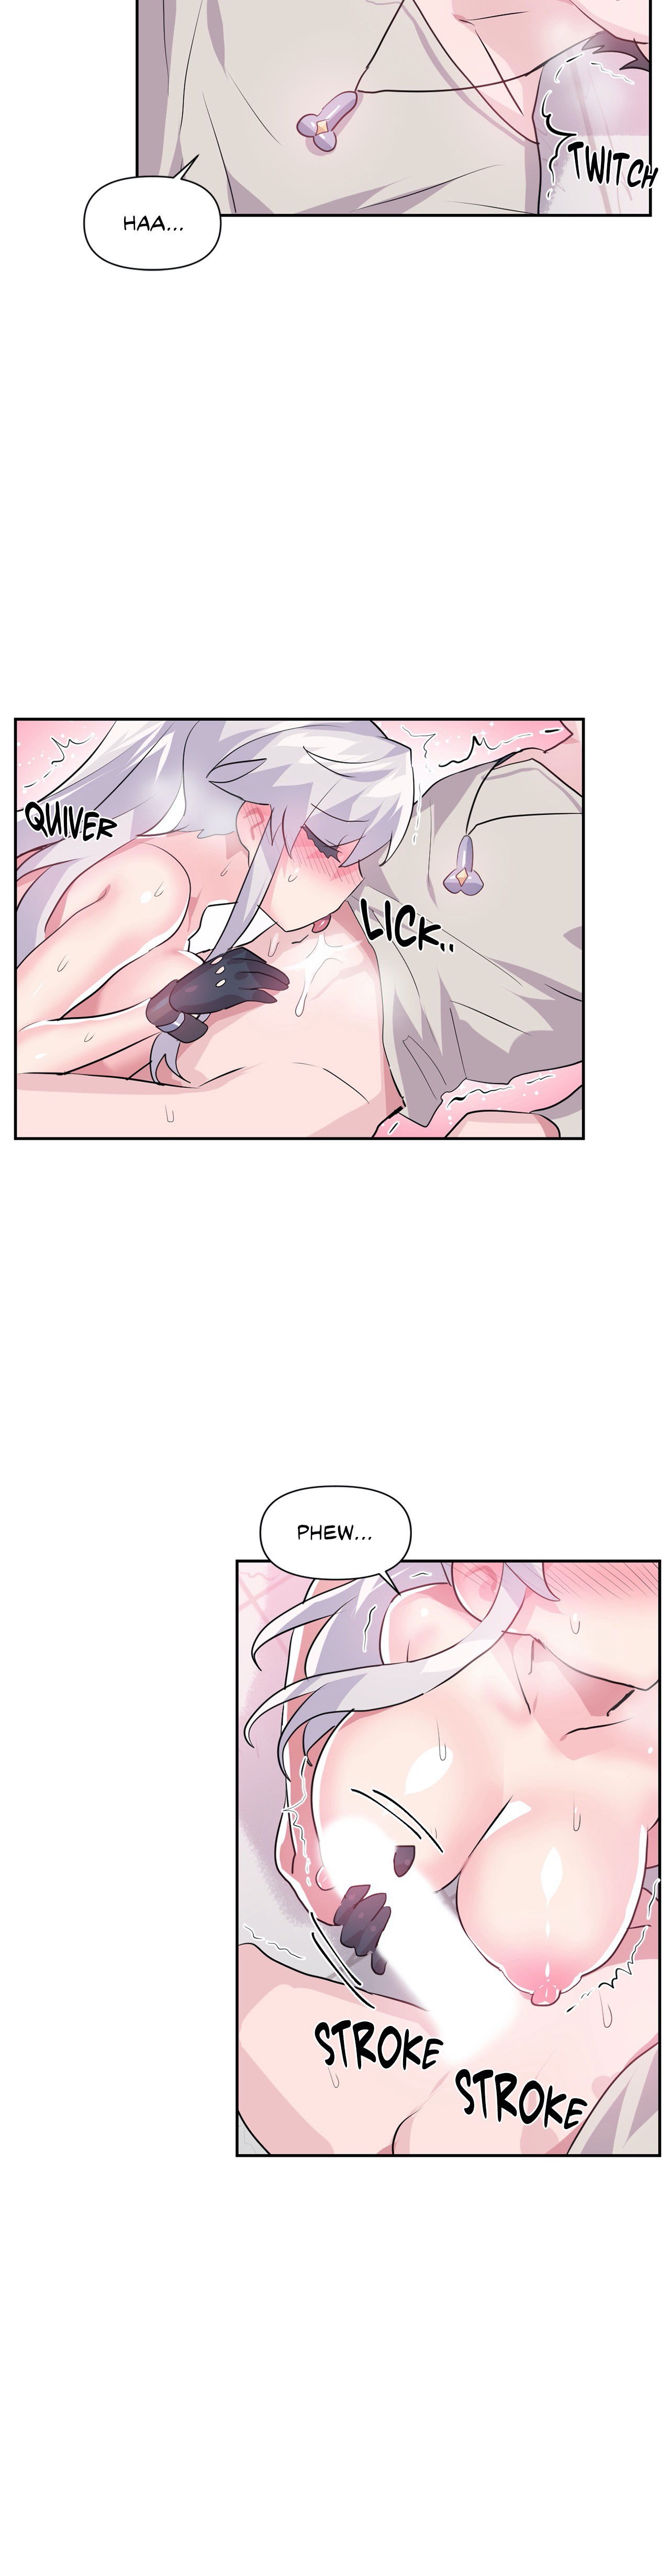 log-in-to-lust-a-land-chap-31-1